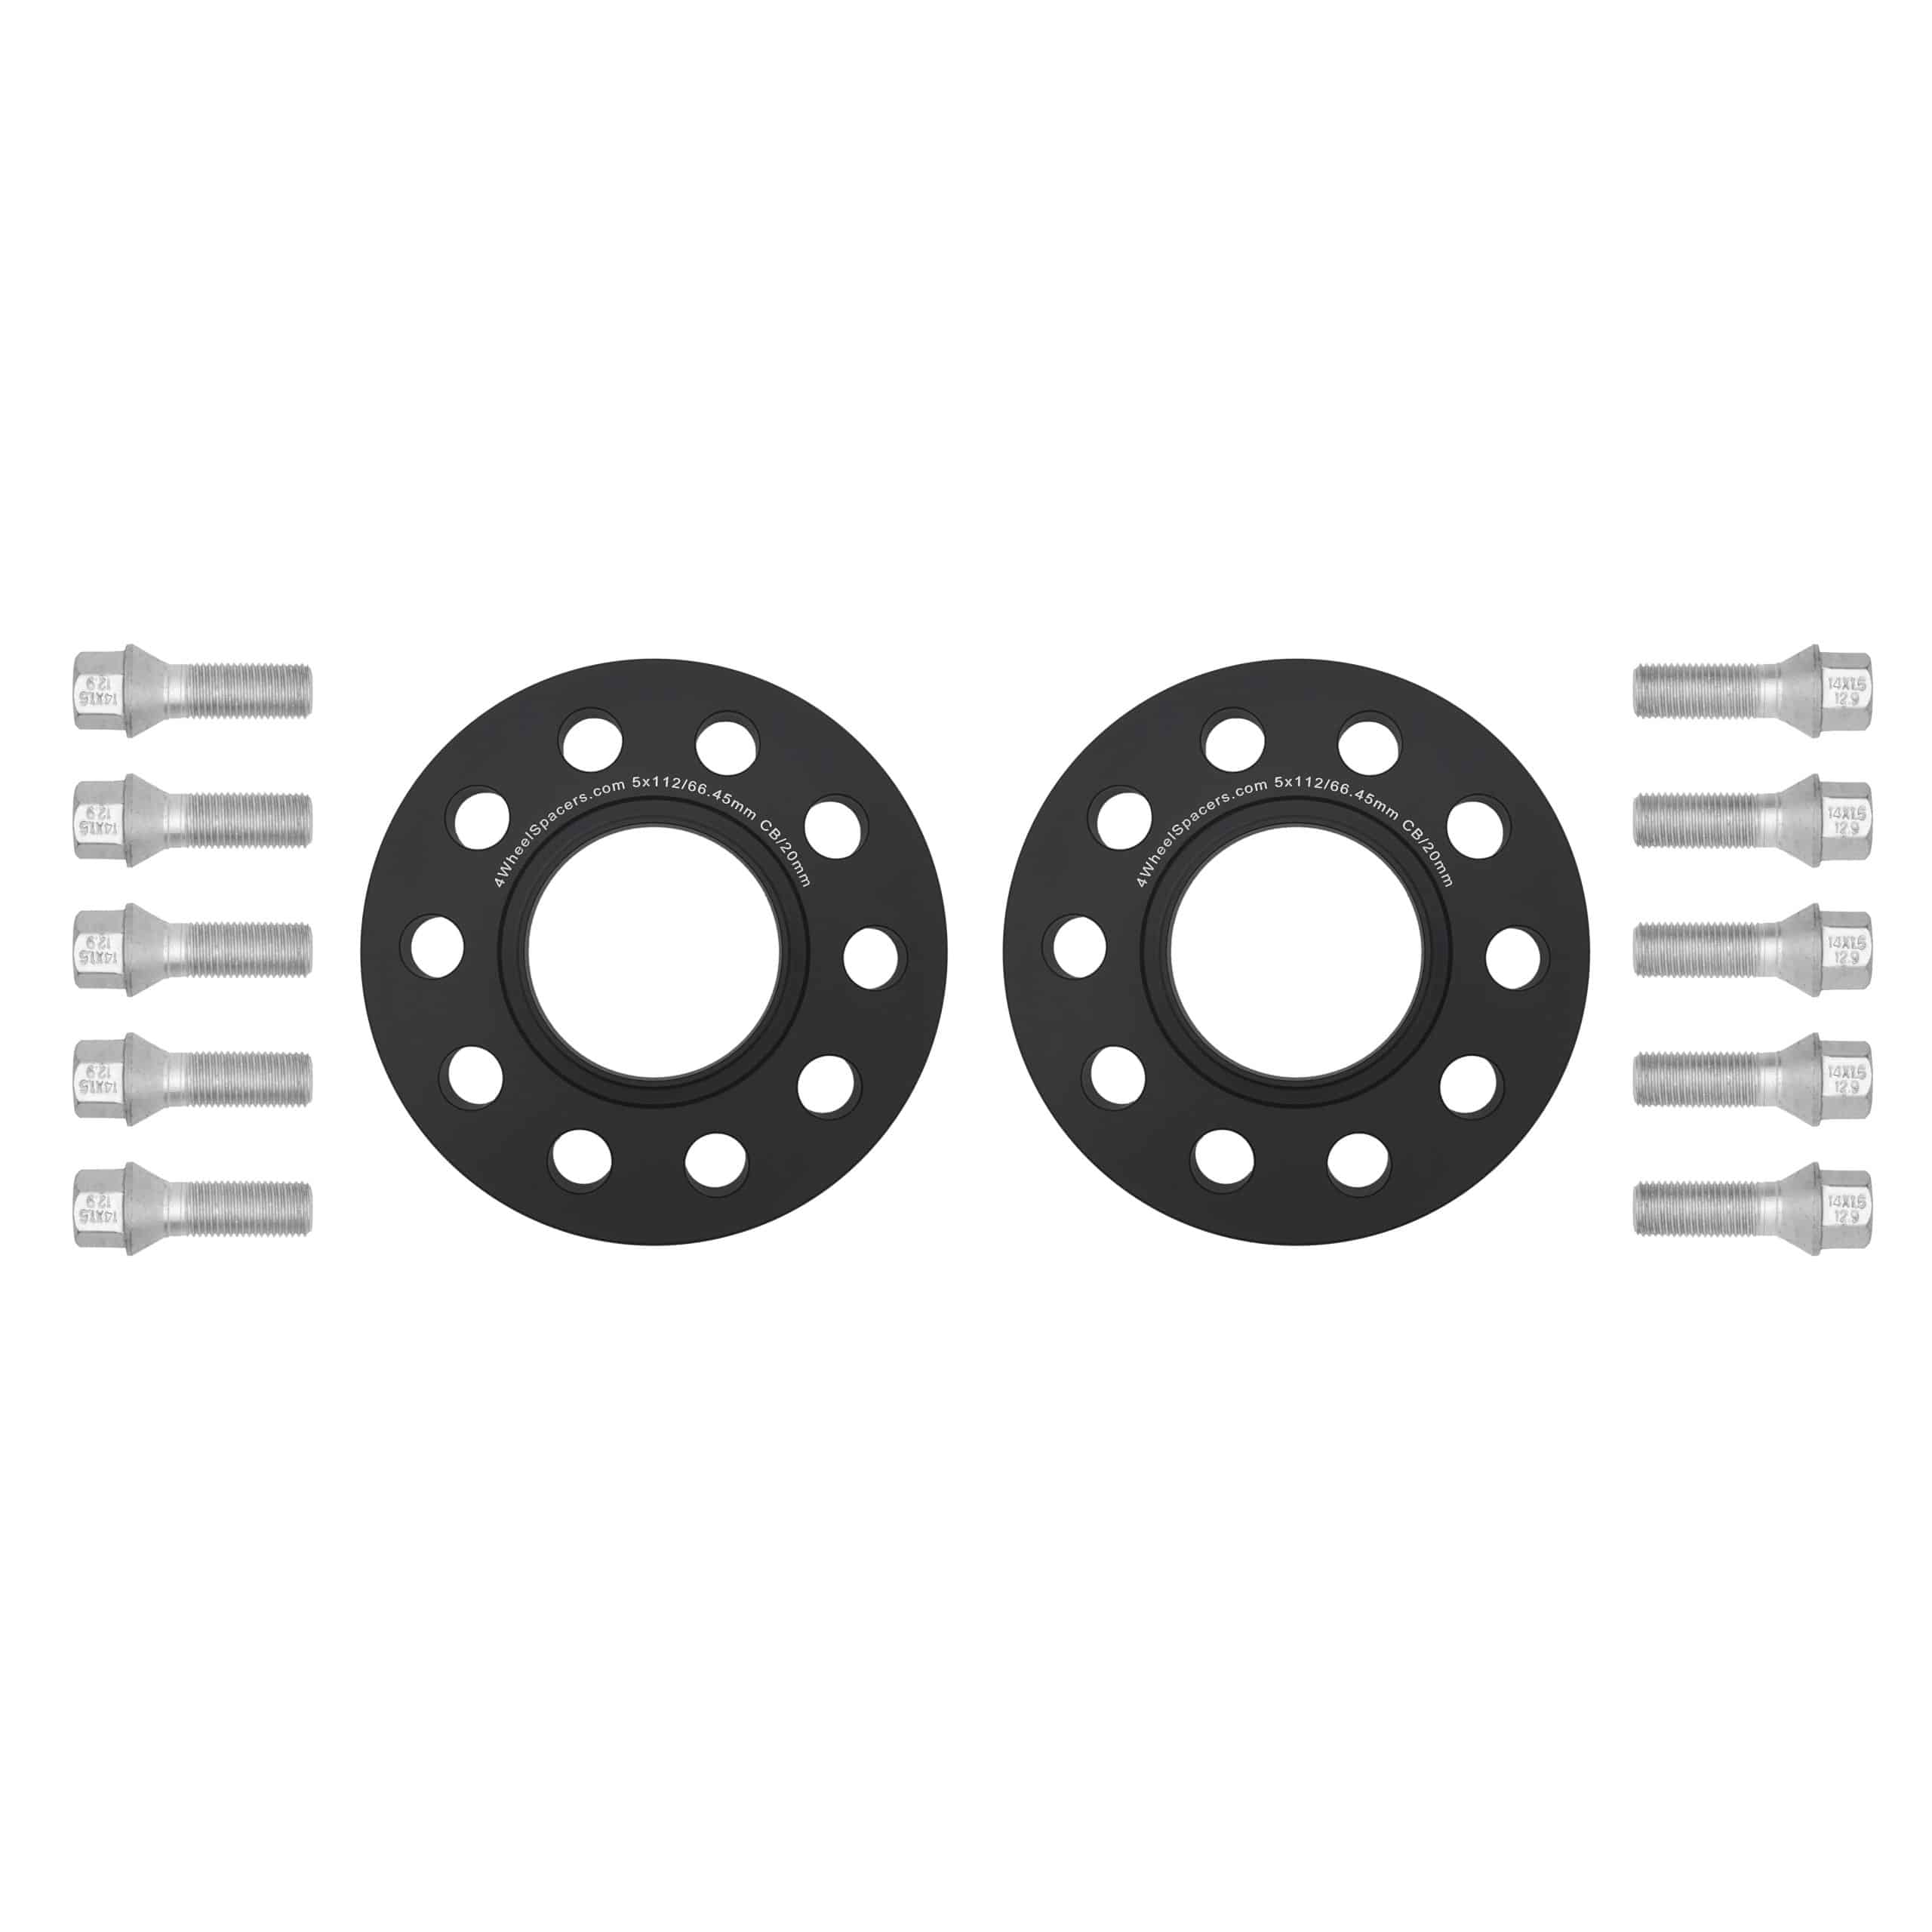 Mercedes-Benz 20mm Hub-Centric Wheel Spacers With Ball Seat Bolt Kit